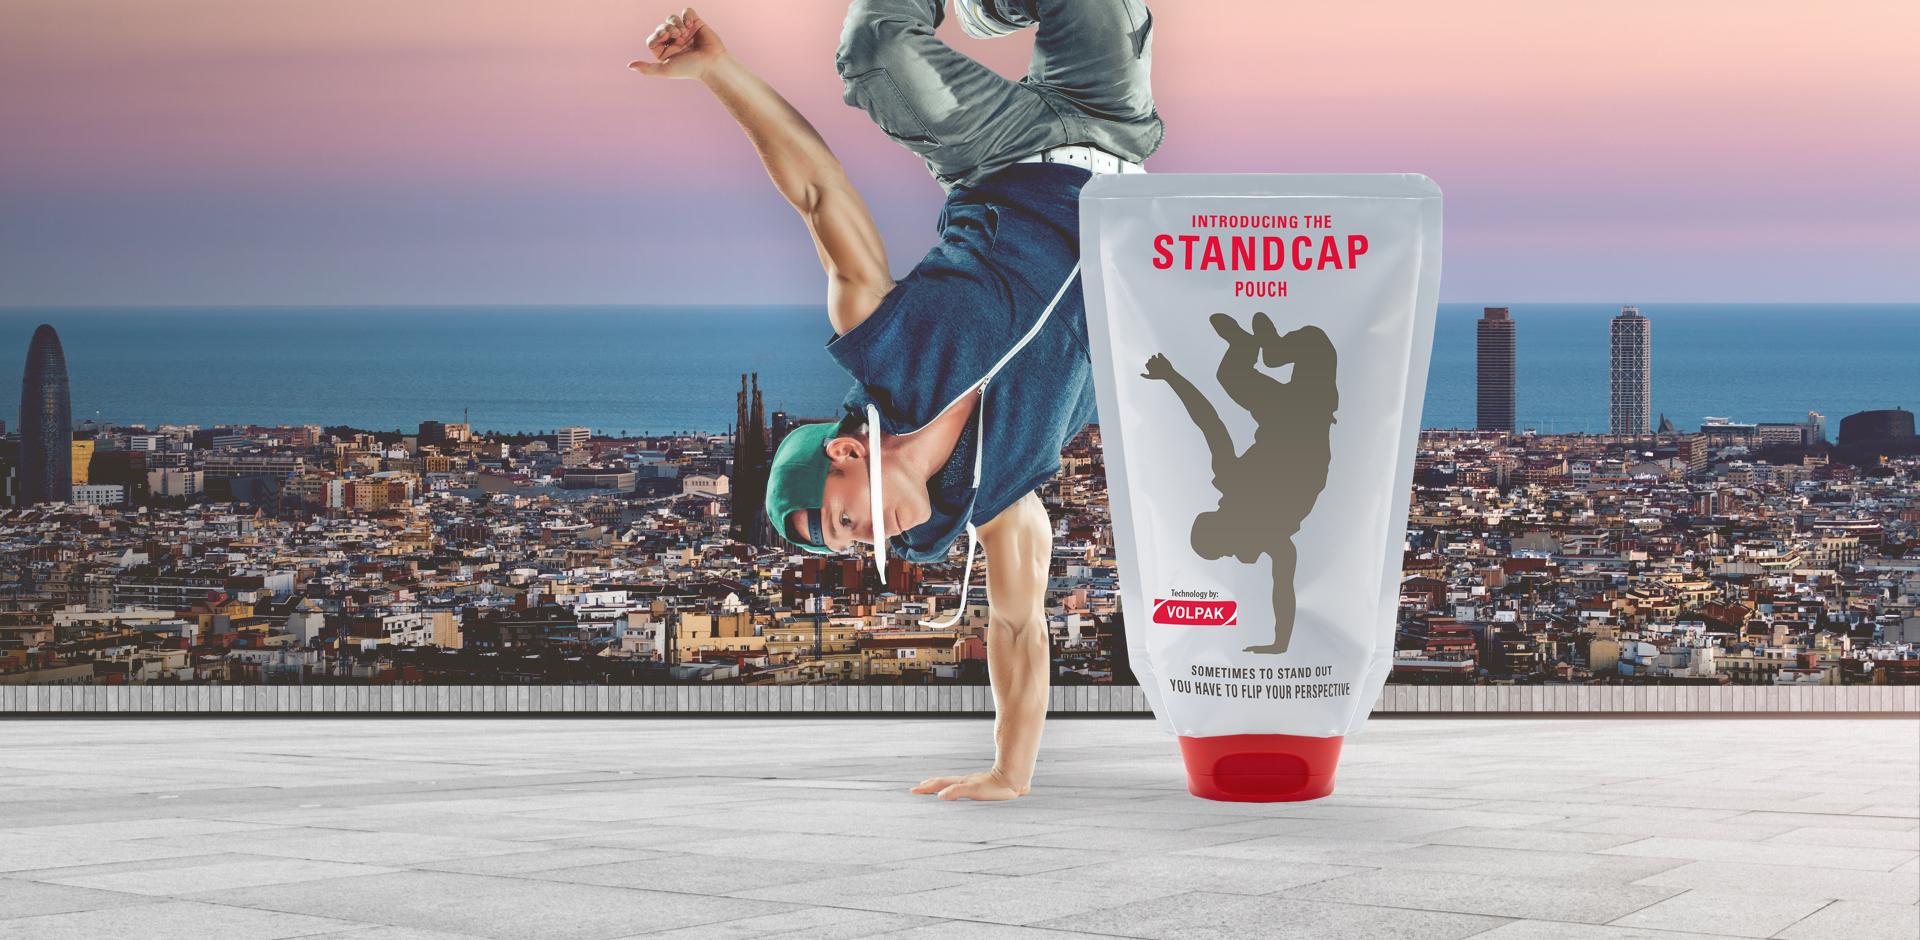 STANDCAP inverted pouch and breakdancer with Barcelona skyline